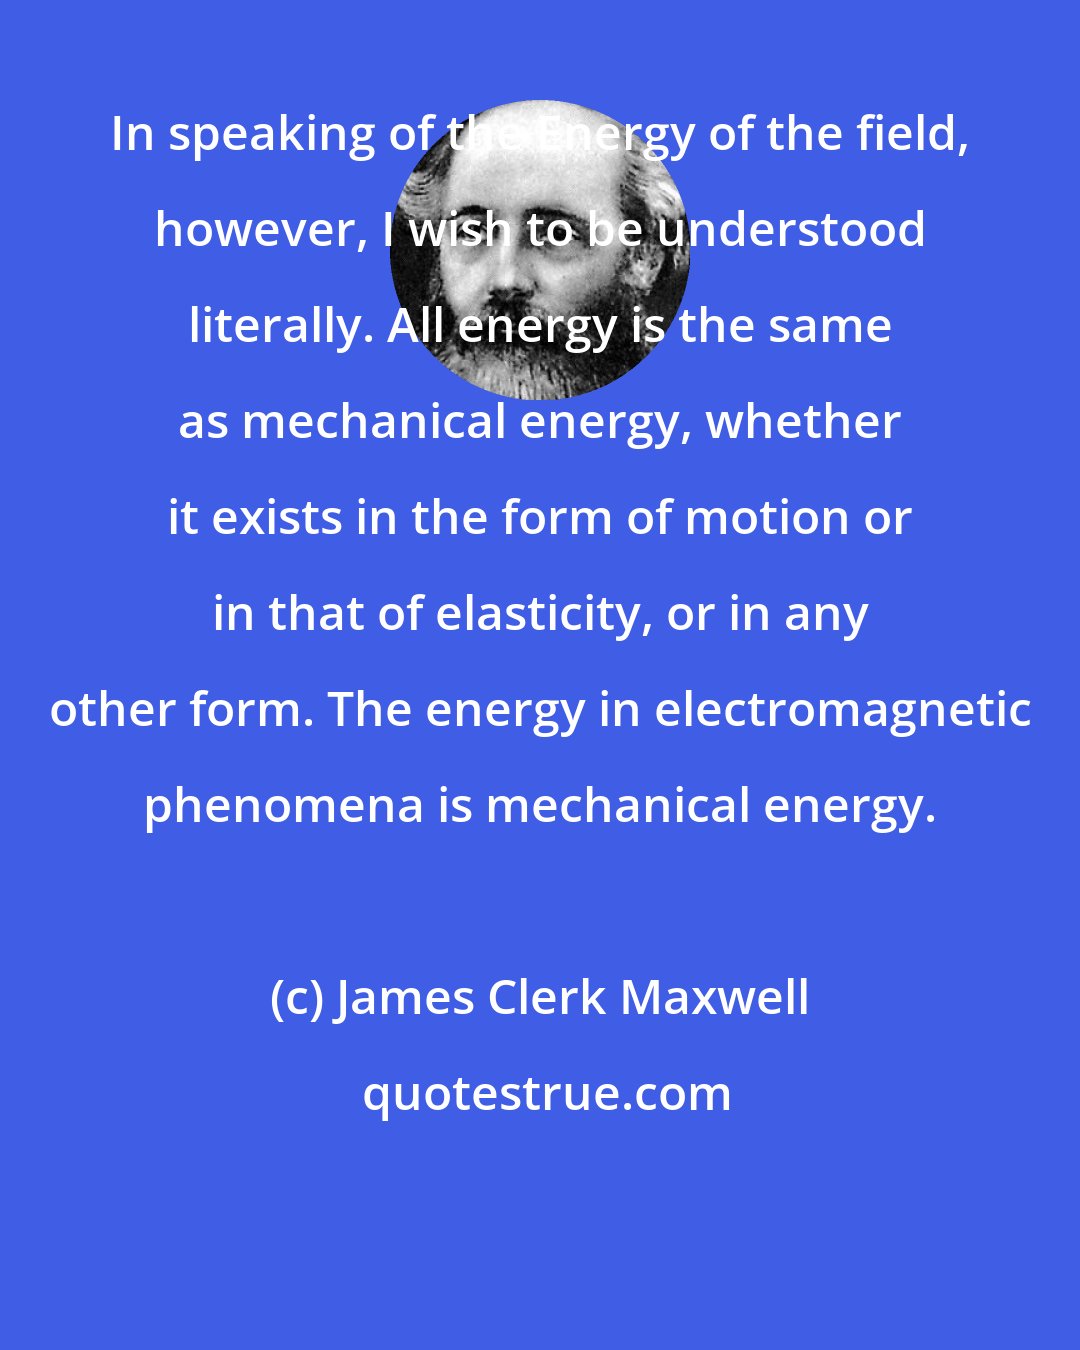 James Clerk Maxwell: In speaking of the Energy of the field, however, I wish to be understood literally. All energy is the same as mechanical energy, whether it exists in the form of motion or in that of elasticity, or in any other form. The energy in electromagnetic phenomena is mechanical energy.